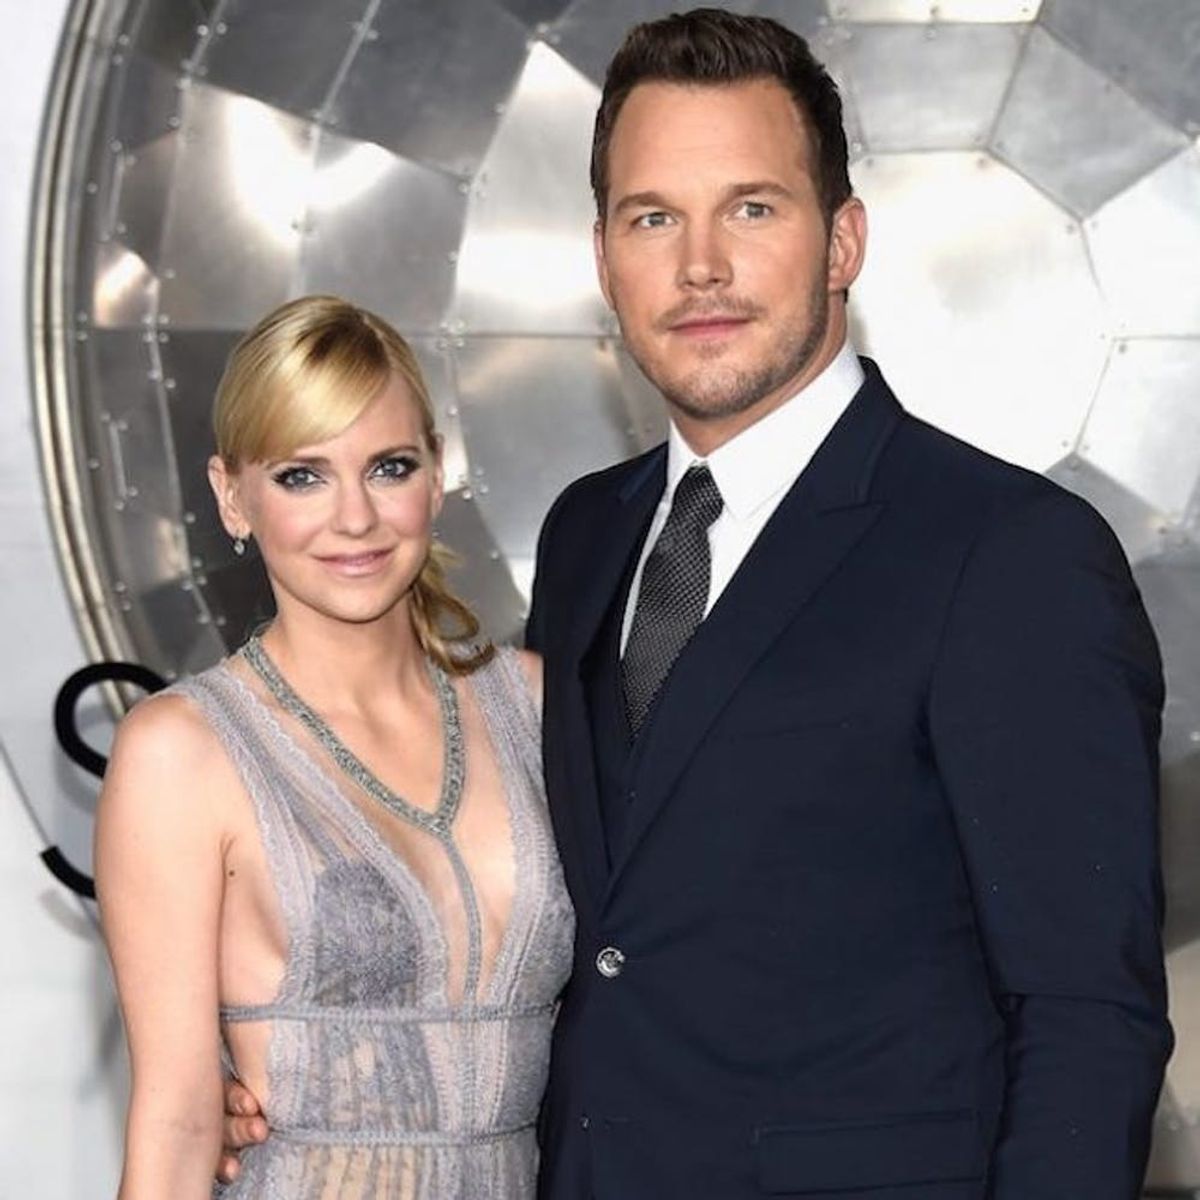 Anna Faris Gets Hilariously Handsy With Chris Pratt on the Red Carpet